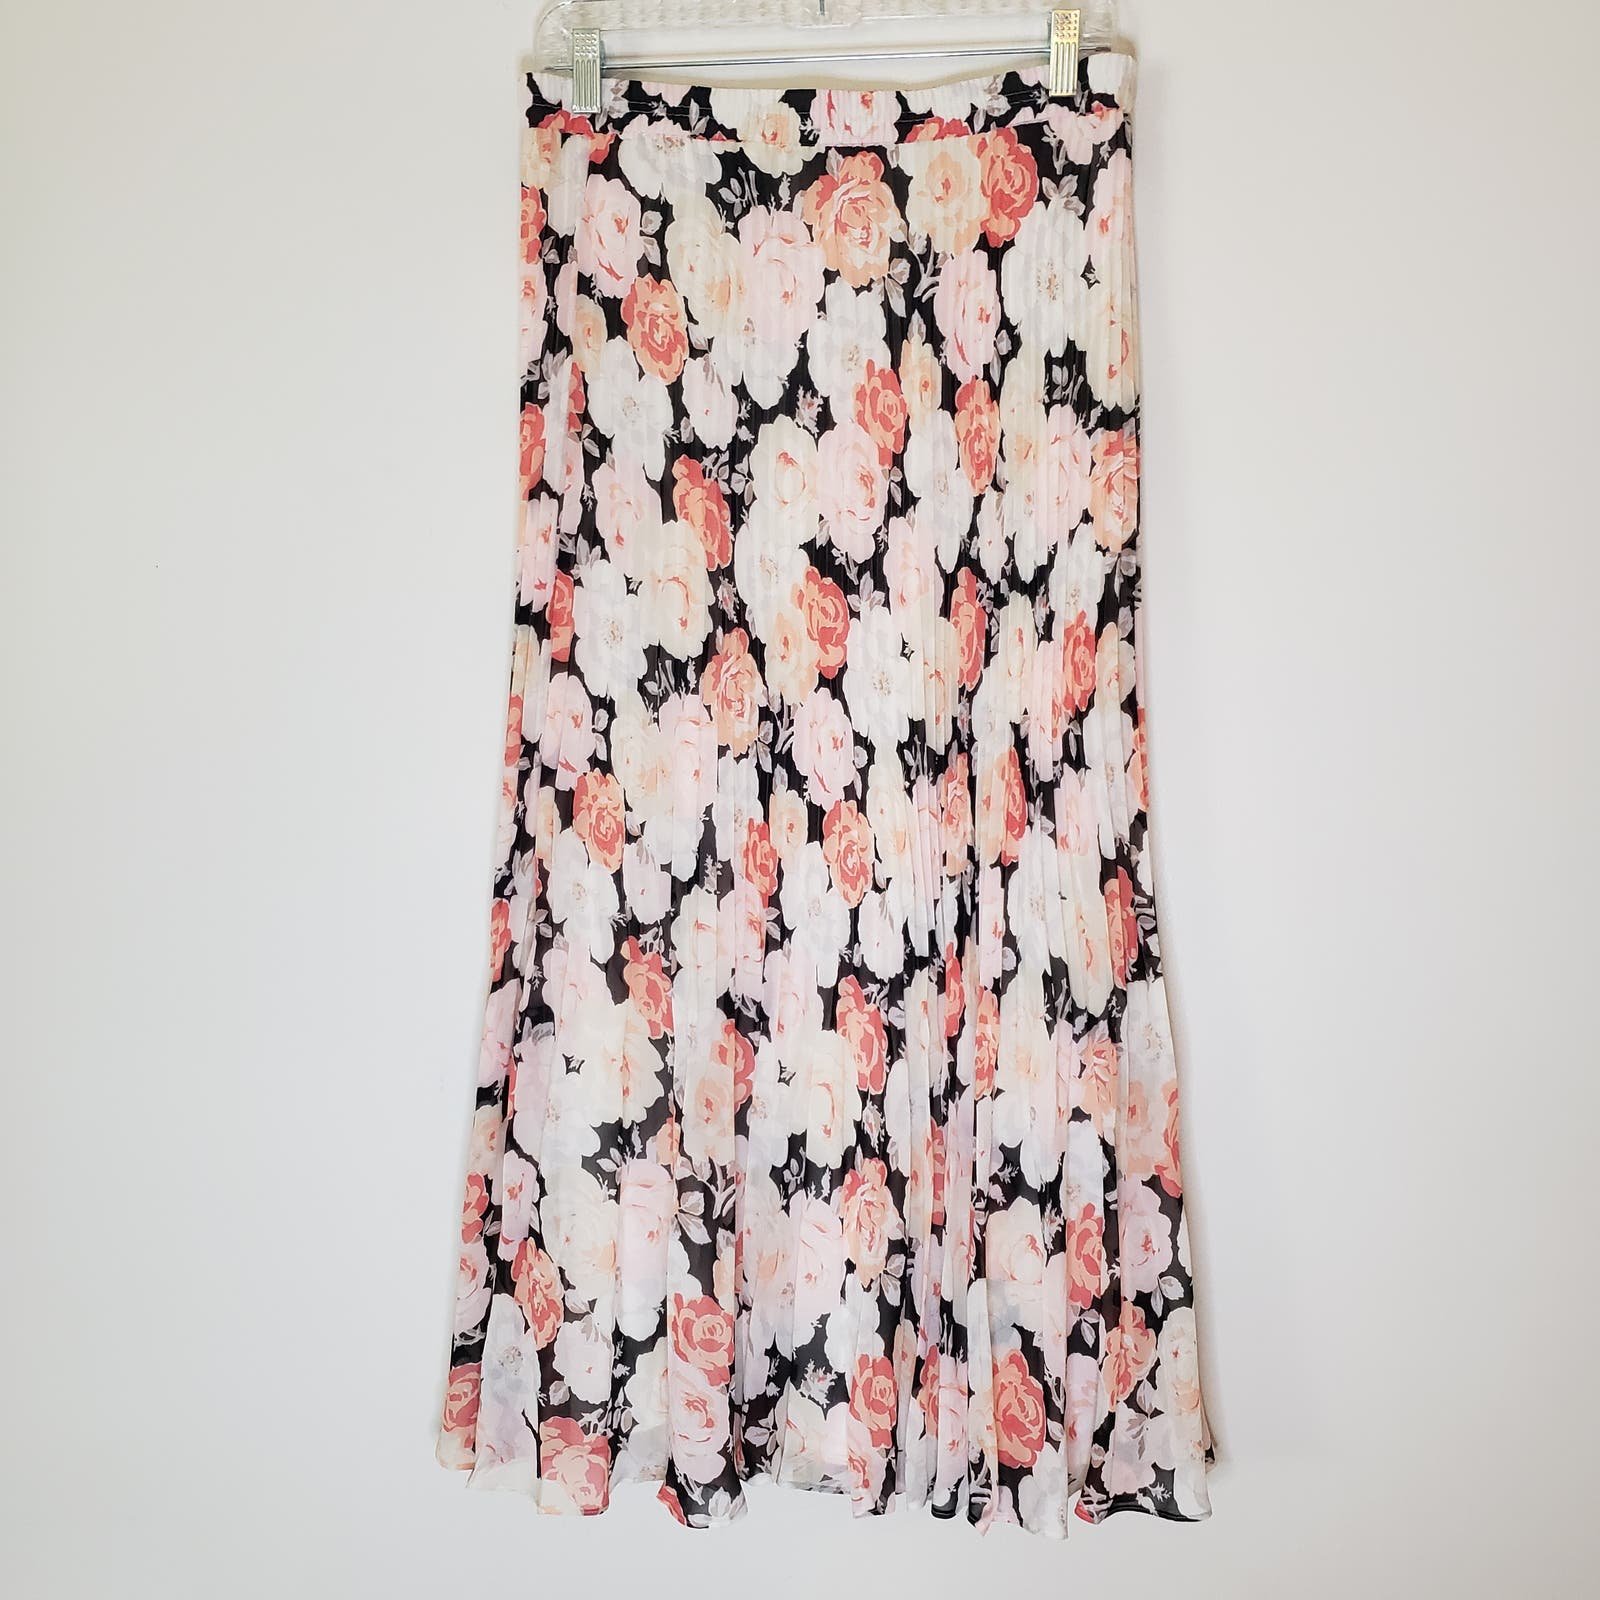 Affordable NWOT Chaps Floral Pleated Maxi Skirt Double Layer Lightweight Size Medium K1LYzo2vj just for you